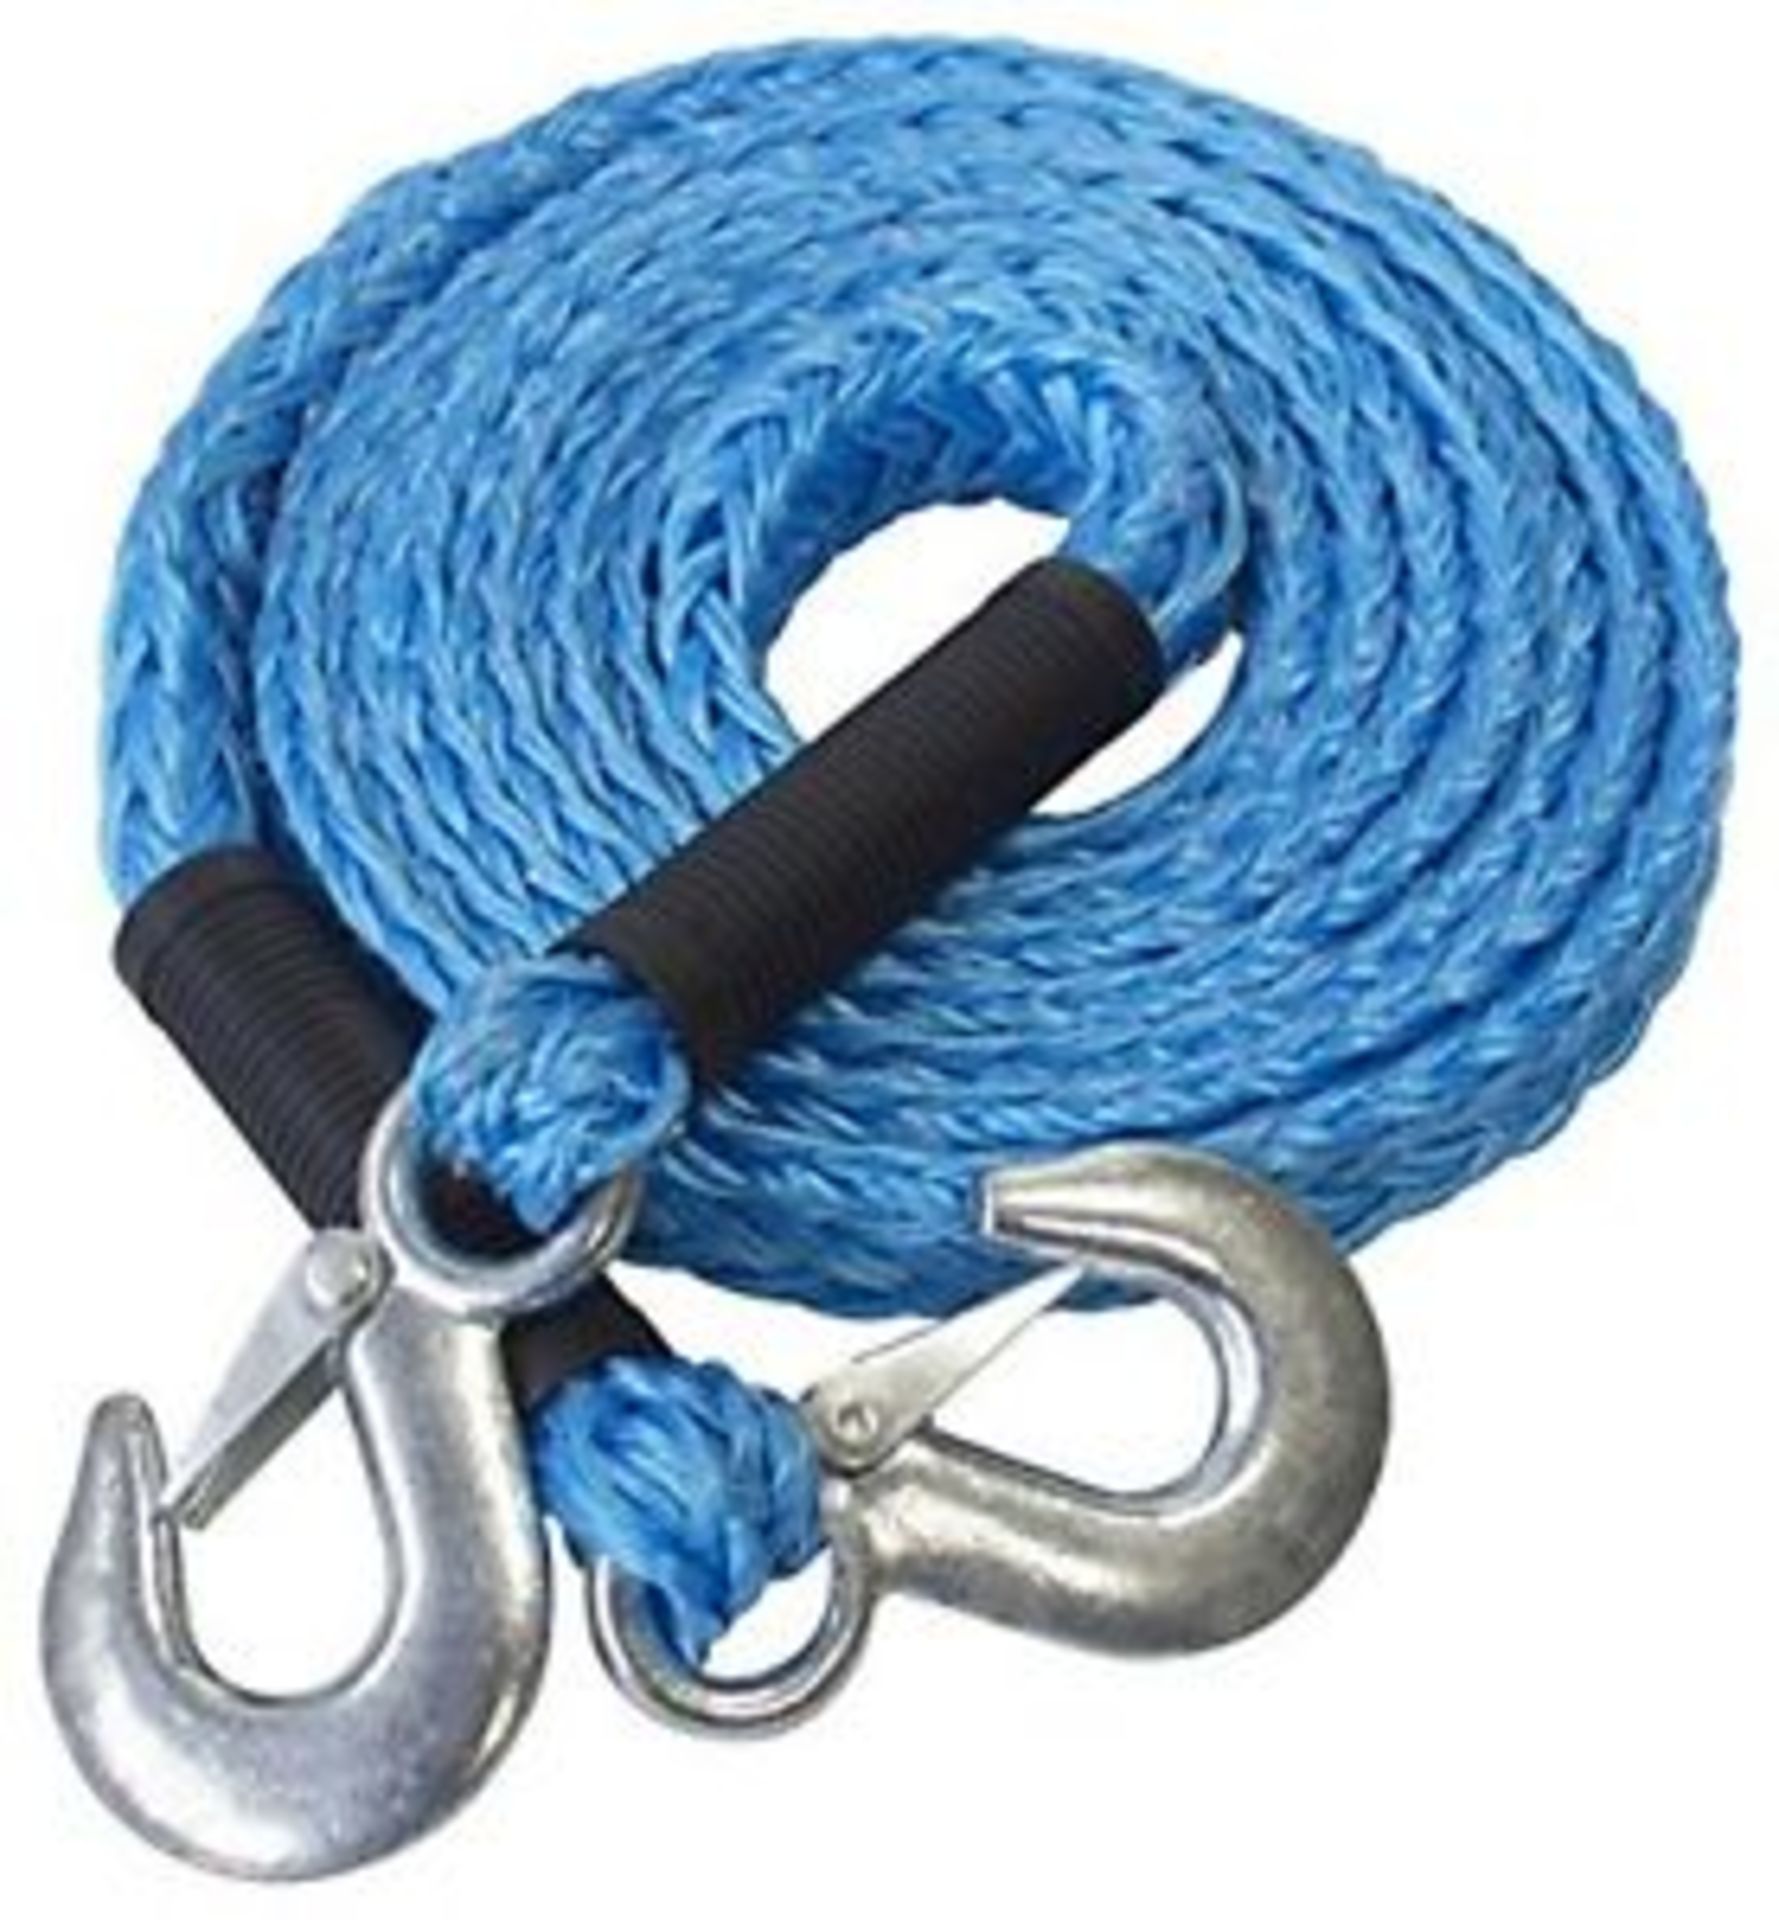 V Brand New Four Metre Tow Rope With Shackle Hooks - Extremely Strong Polypropylene Rope